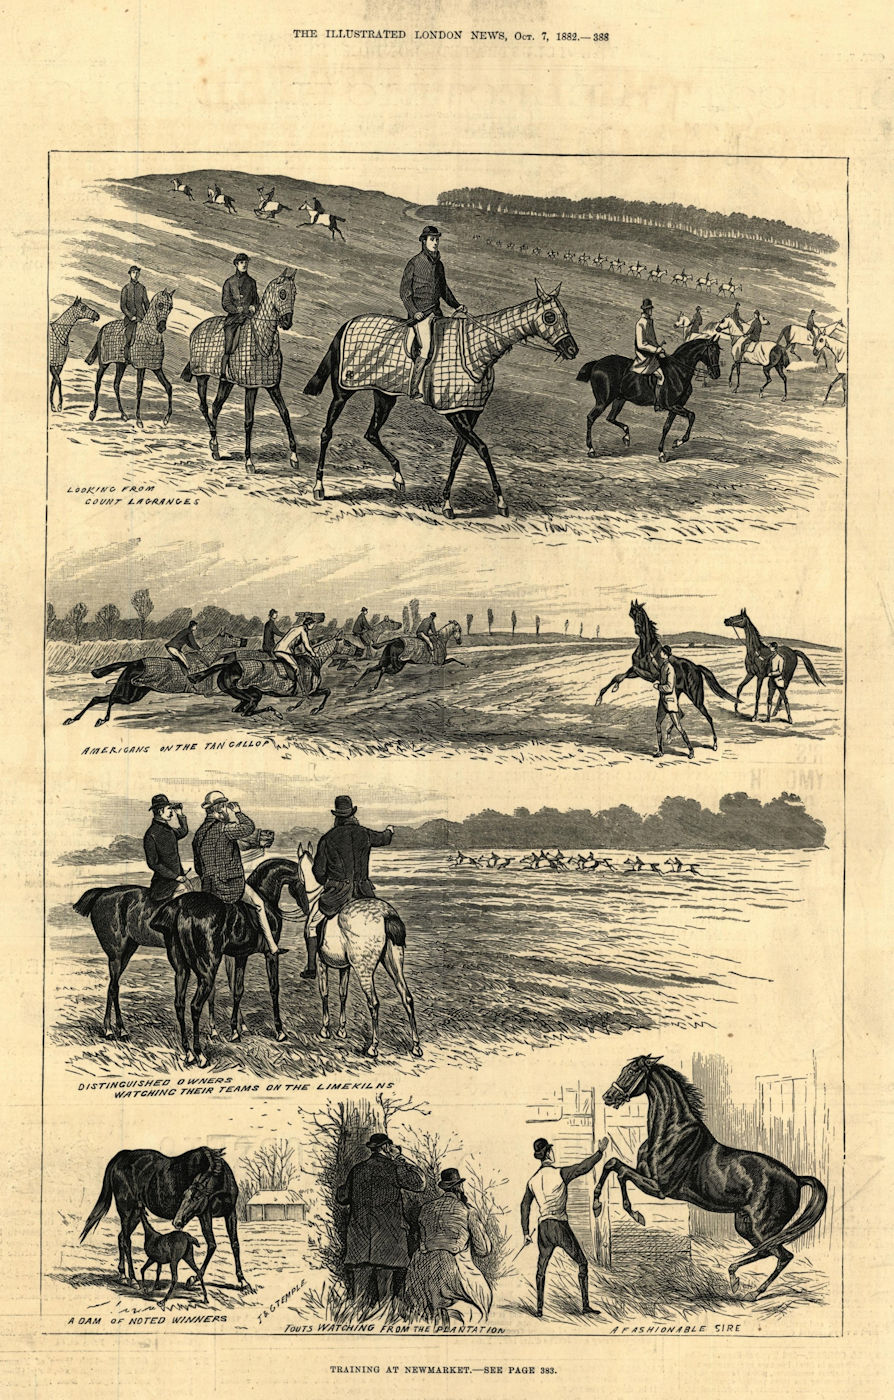 Associate Product Training at Newmarket. Suffolk. Horses 1882 antique ILN full page print